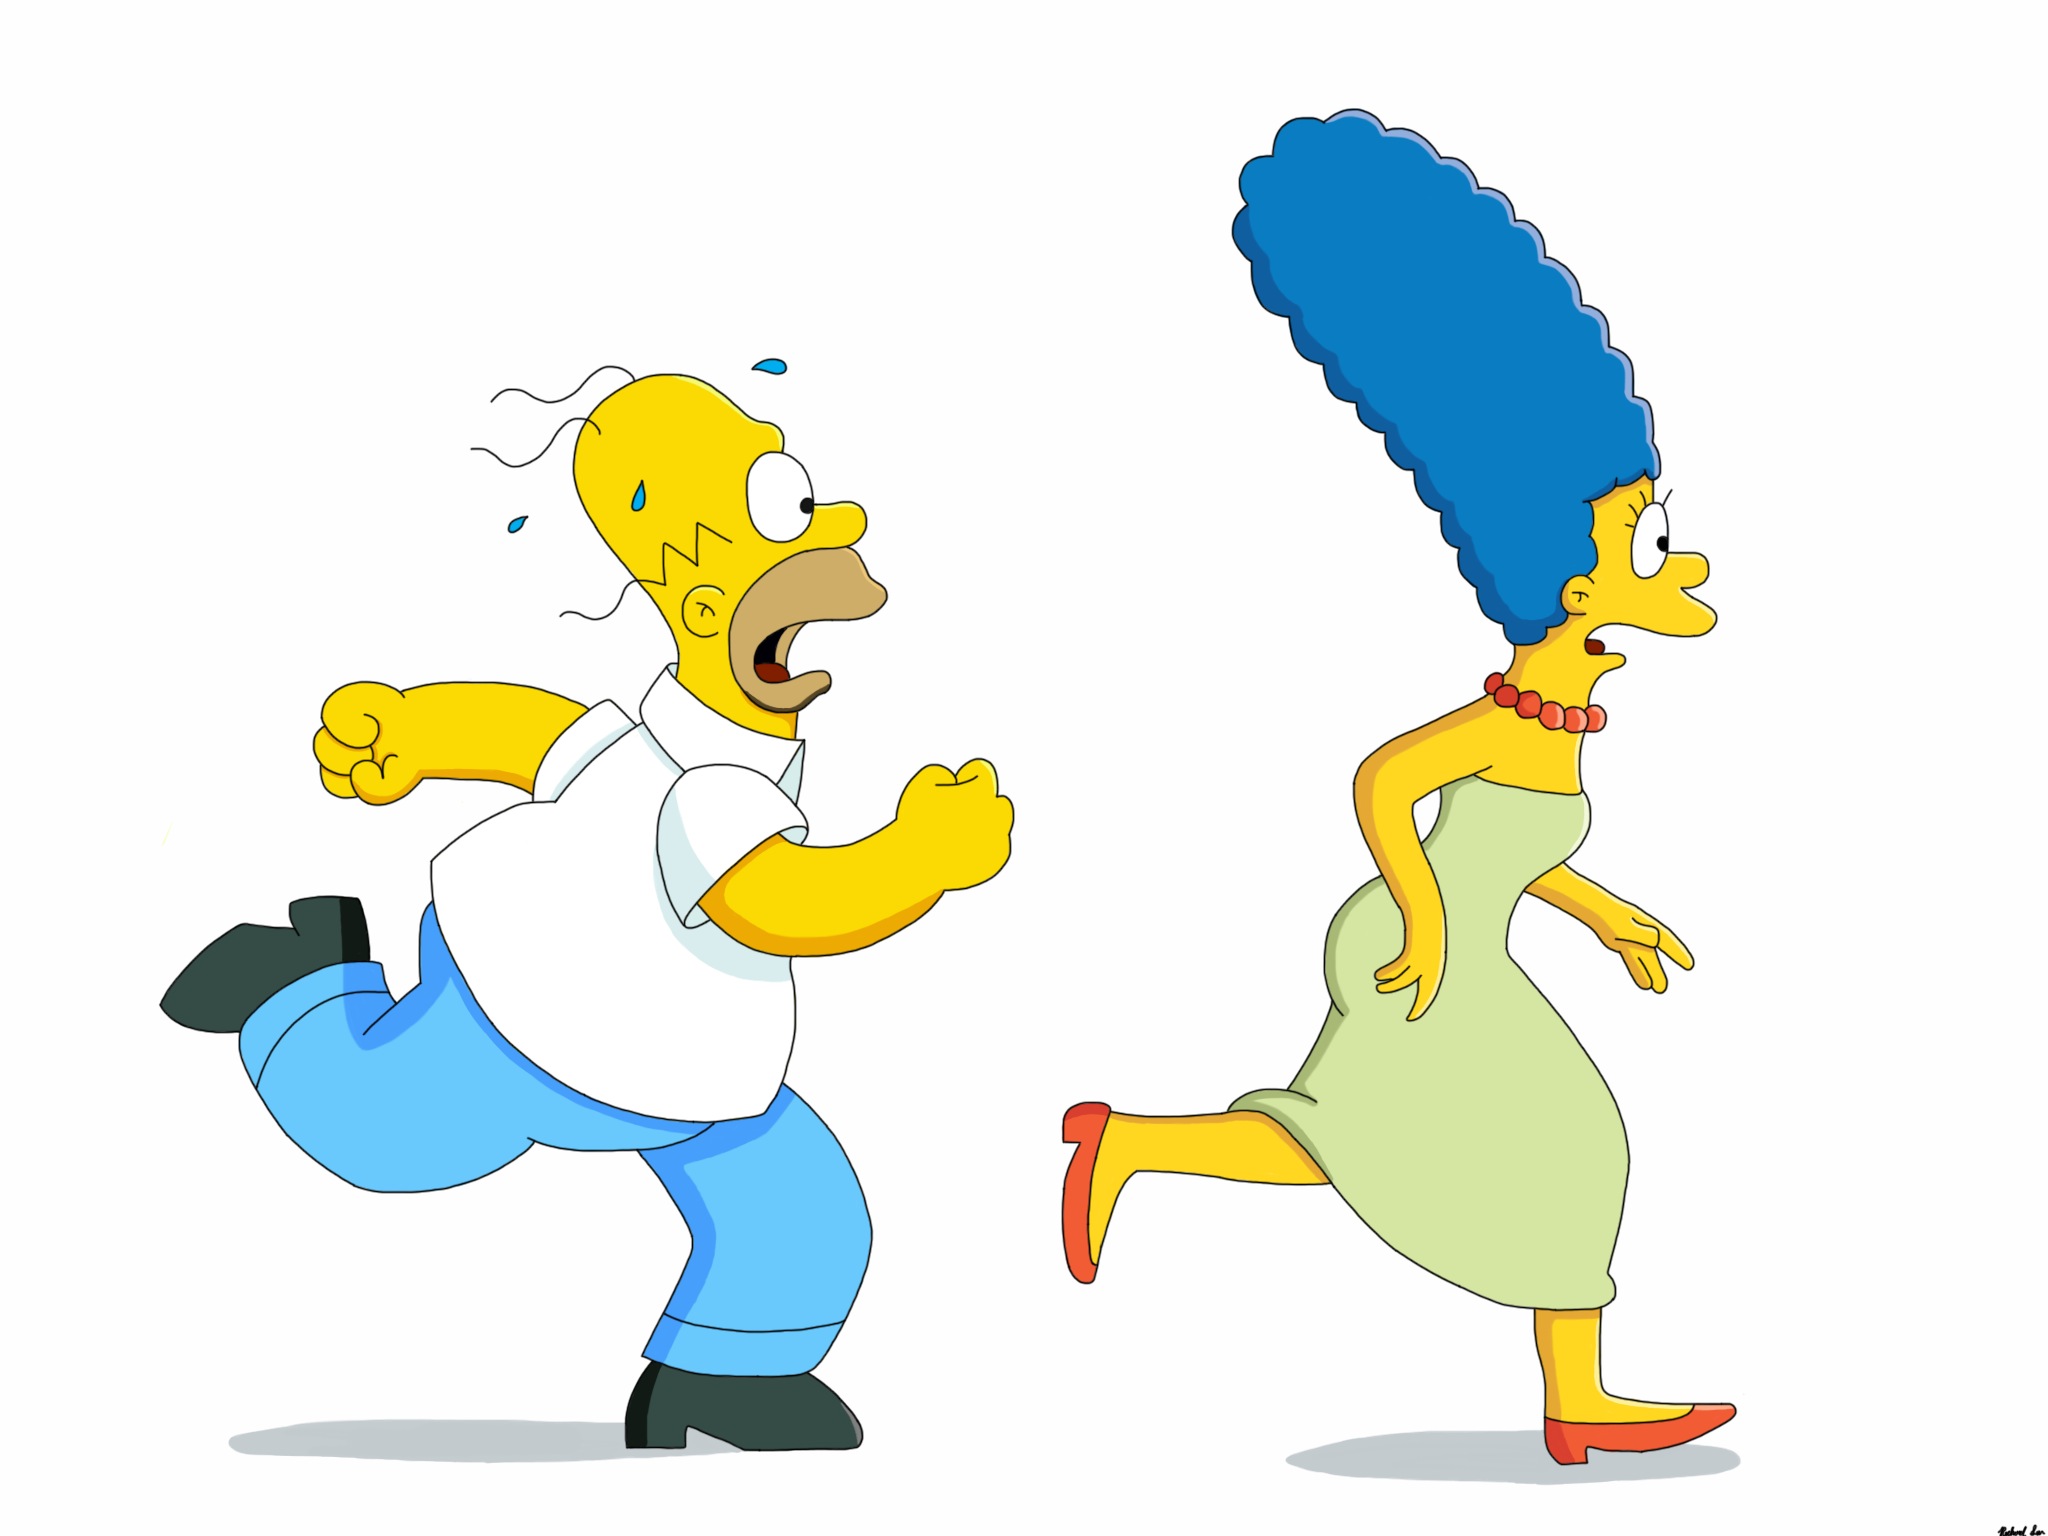 Marge Simpson by Spartandragon12 on DeviantArt